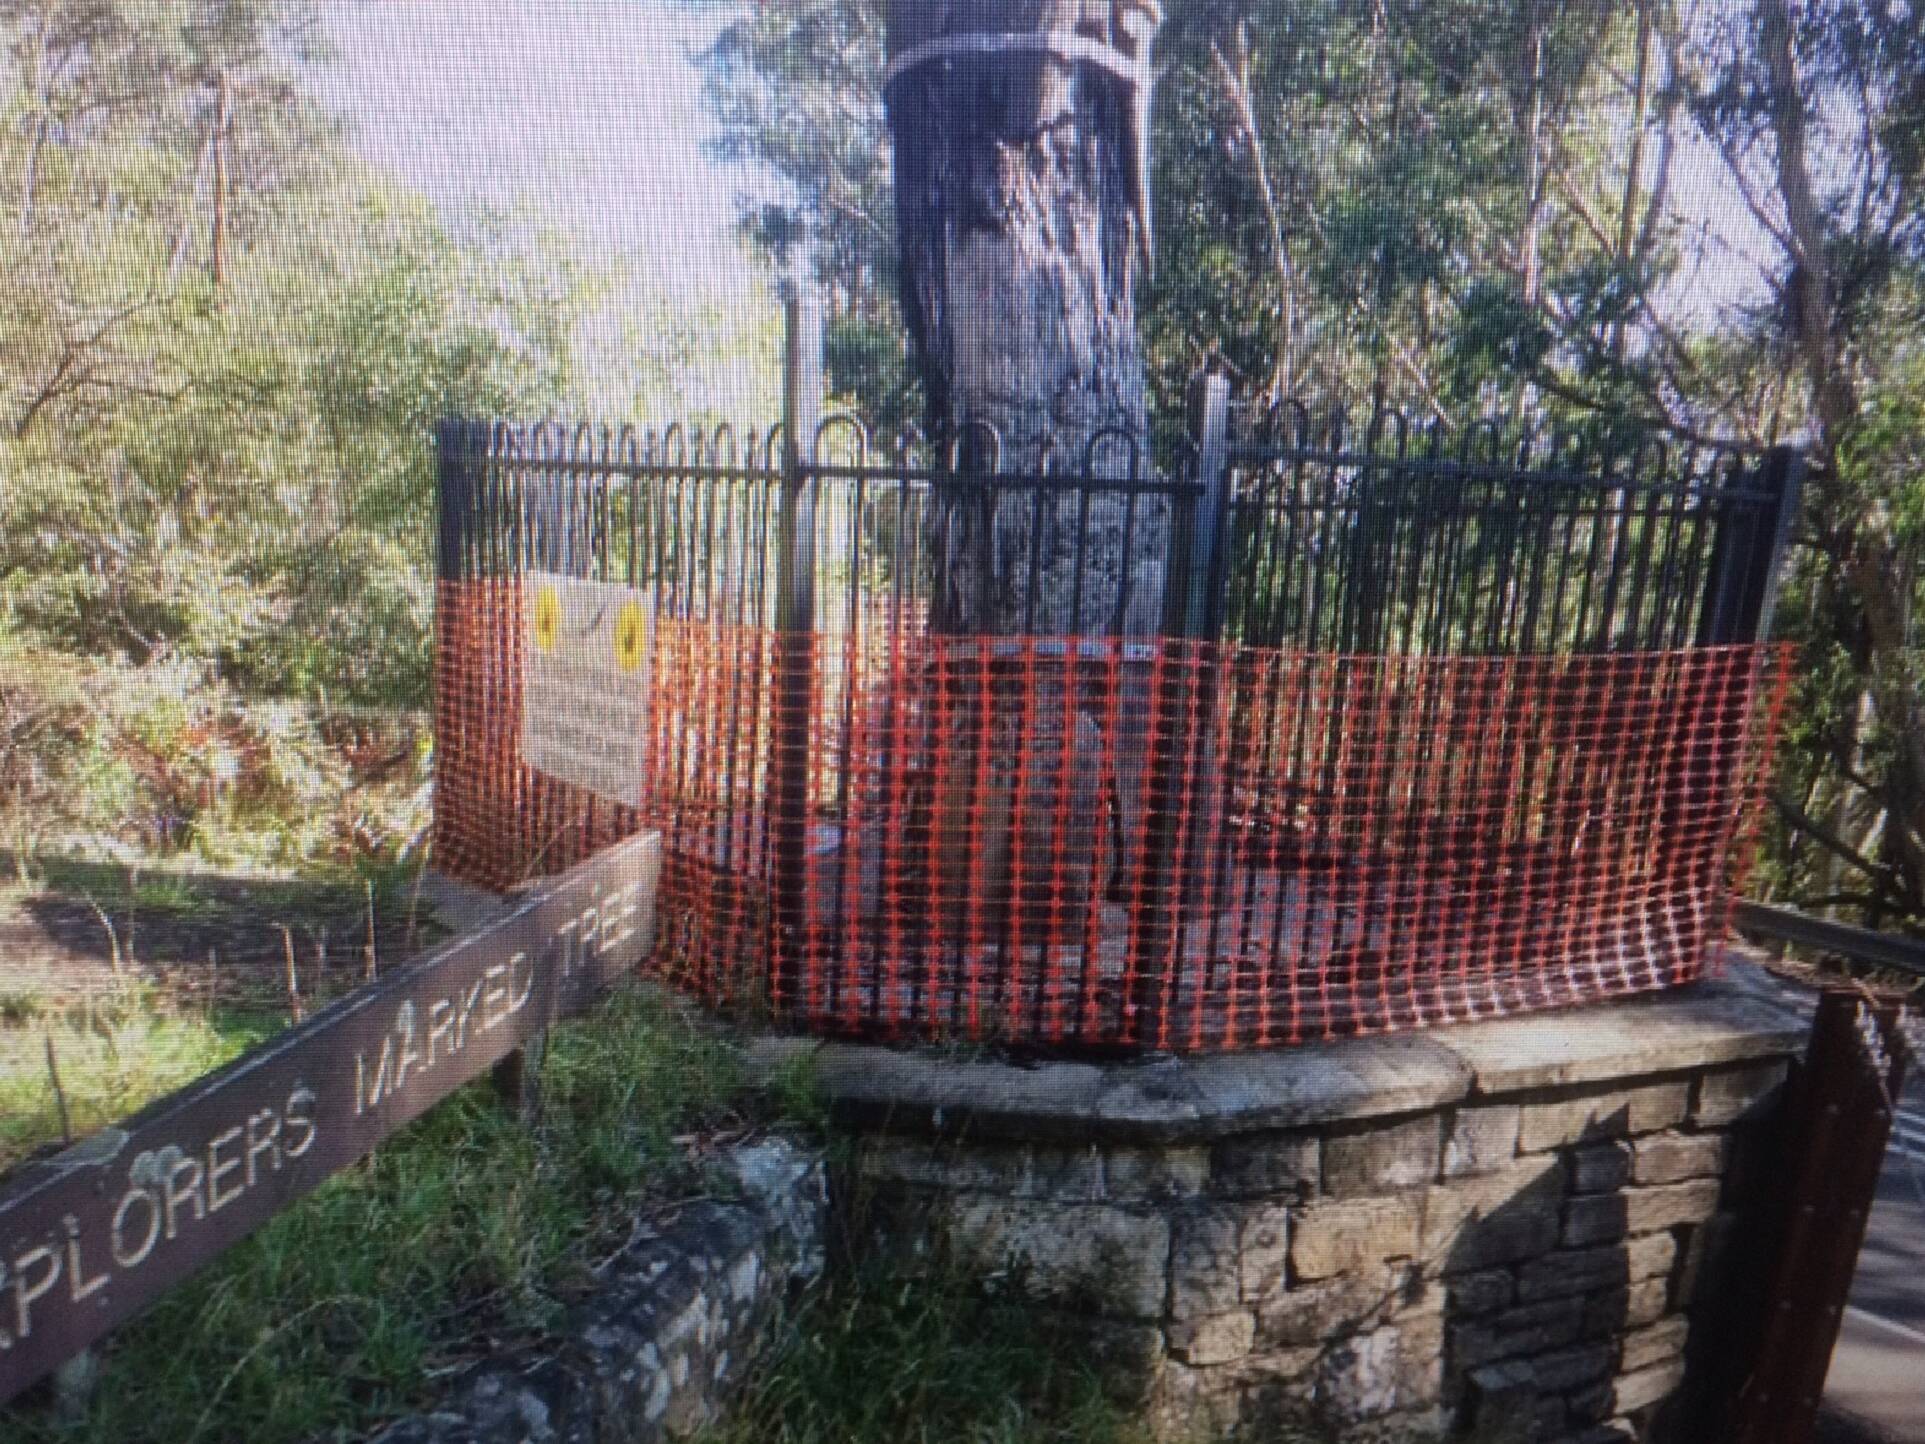 Katoomba's Explorers Tree gone, but hunt for historic marks in